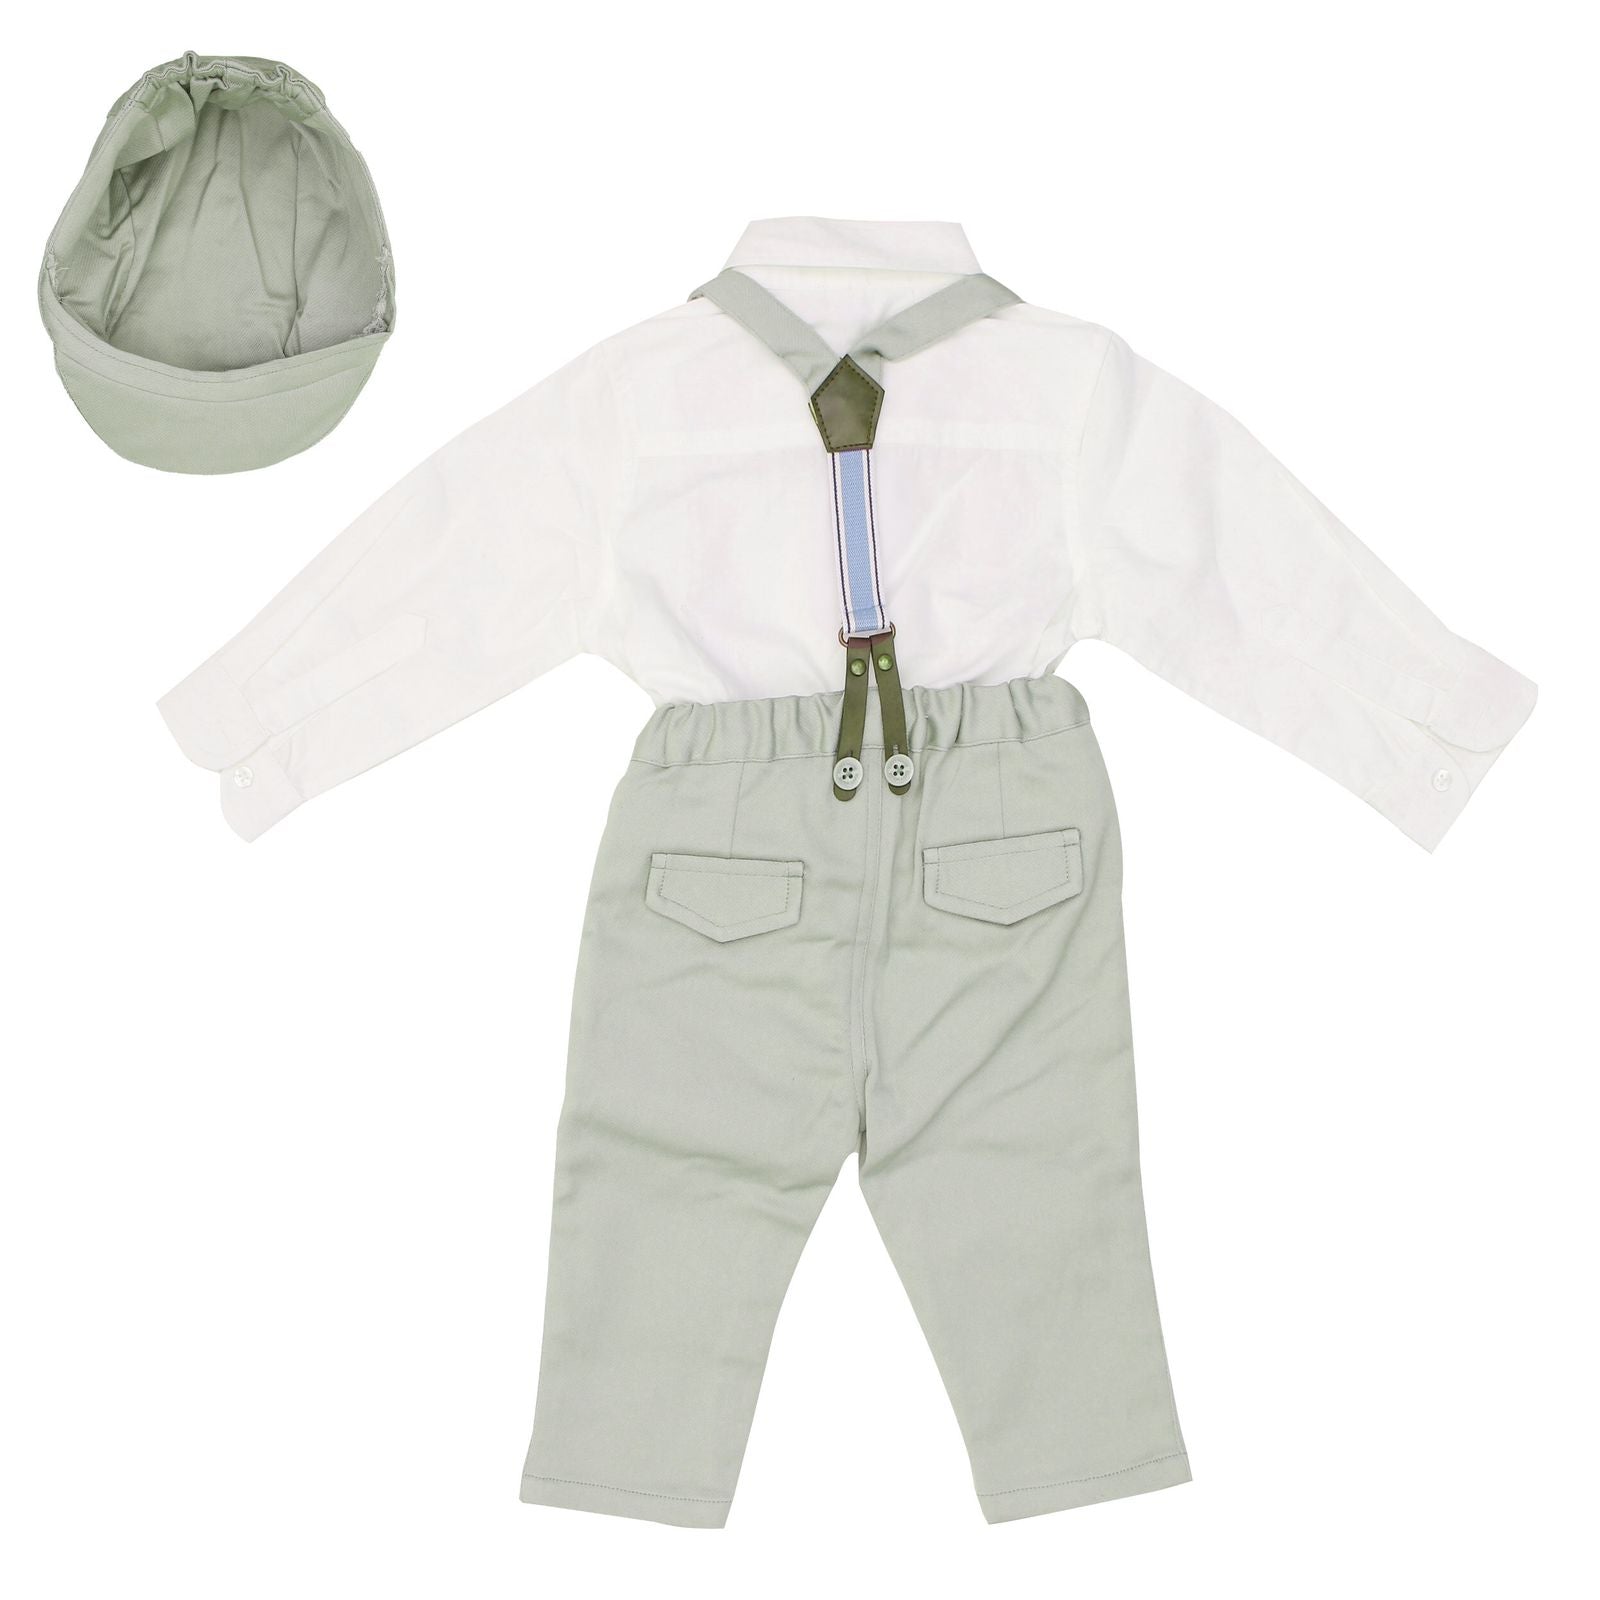 Buy Page Boy Green Suit Set Baby Boy Linen Carrier Pants Infant Trousers  Toddler Shirt Baptism Suspender Outfit Online in India - Etsy